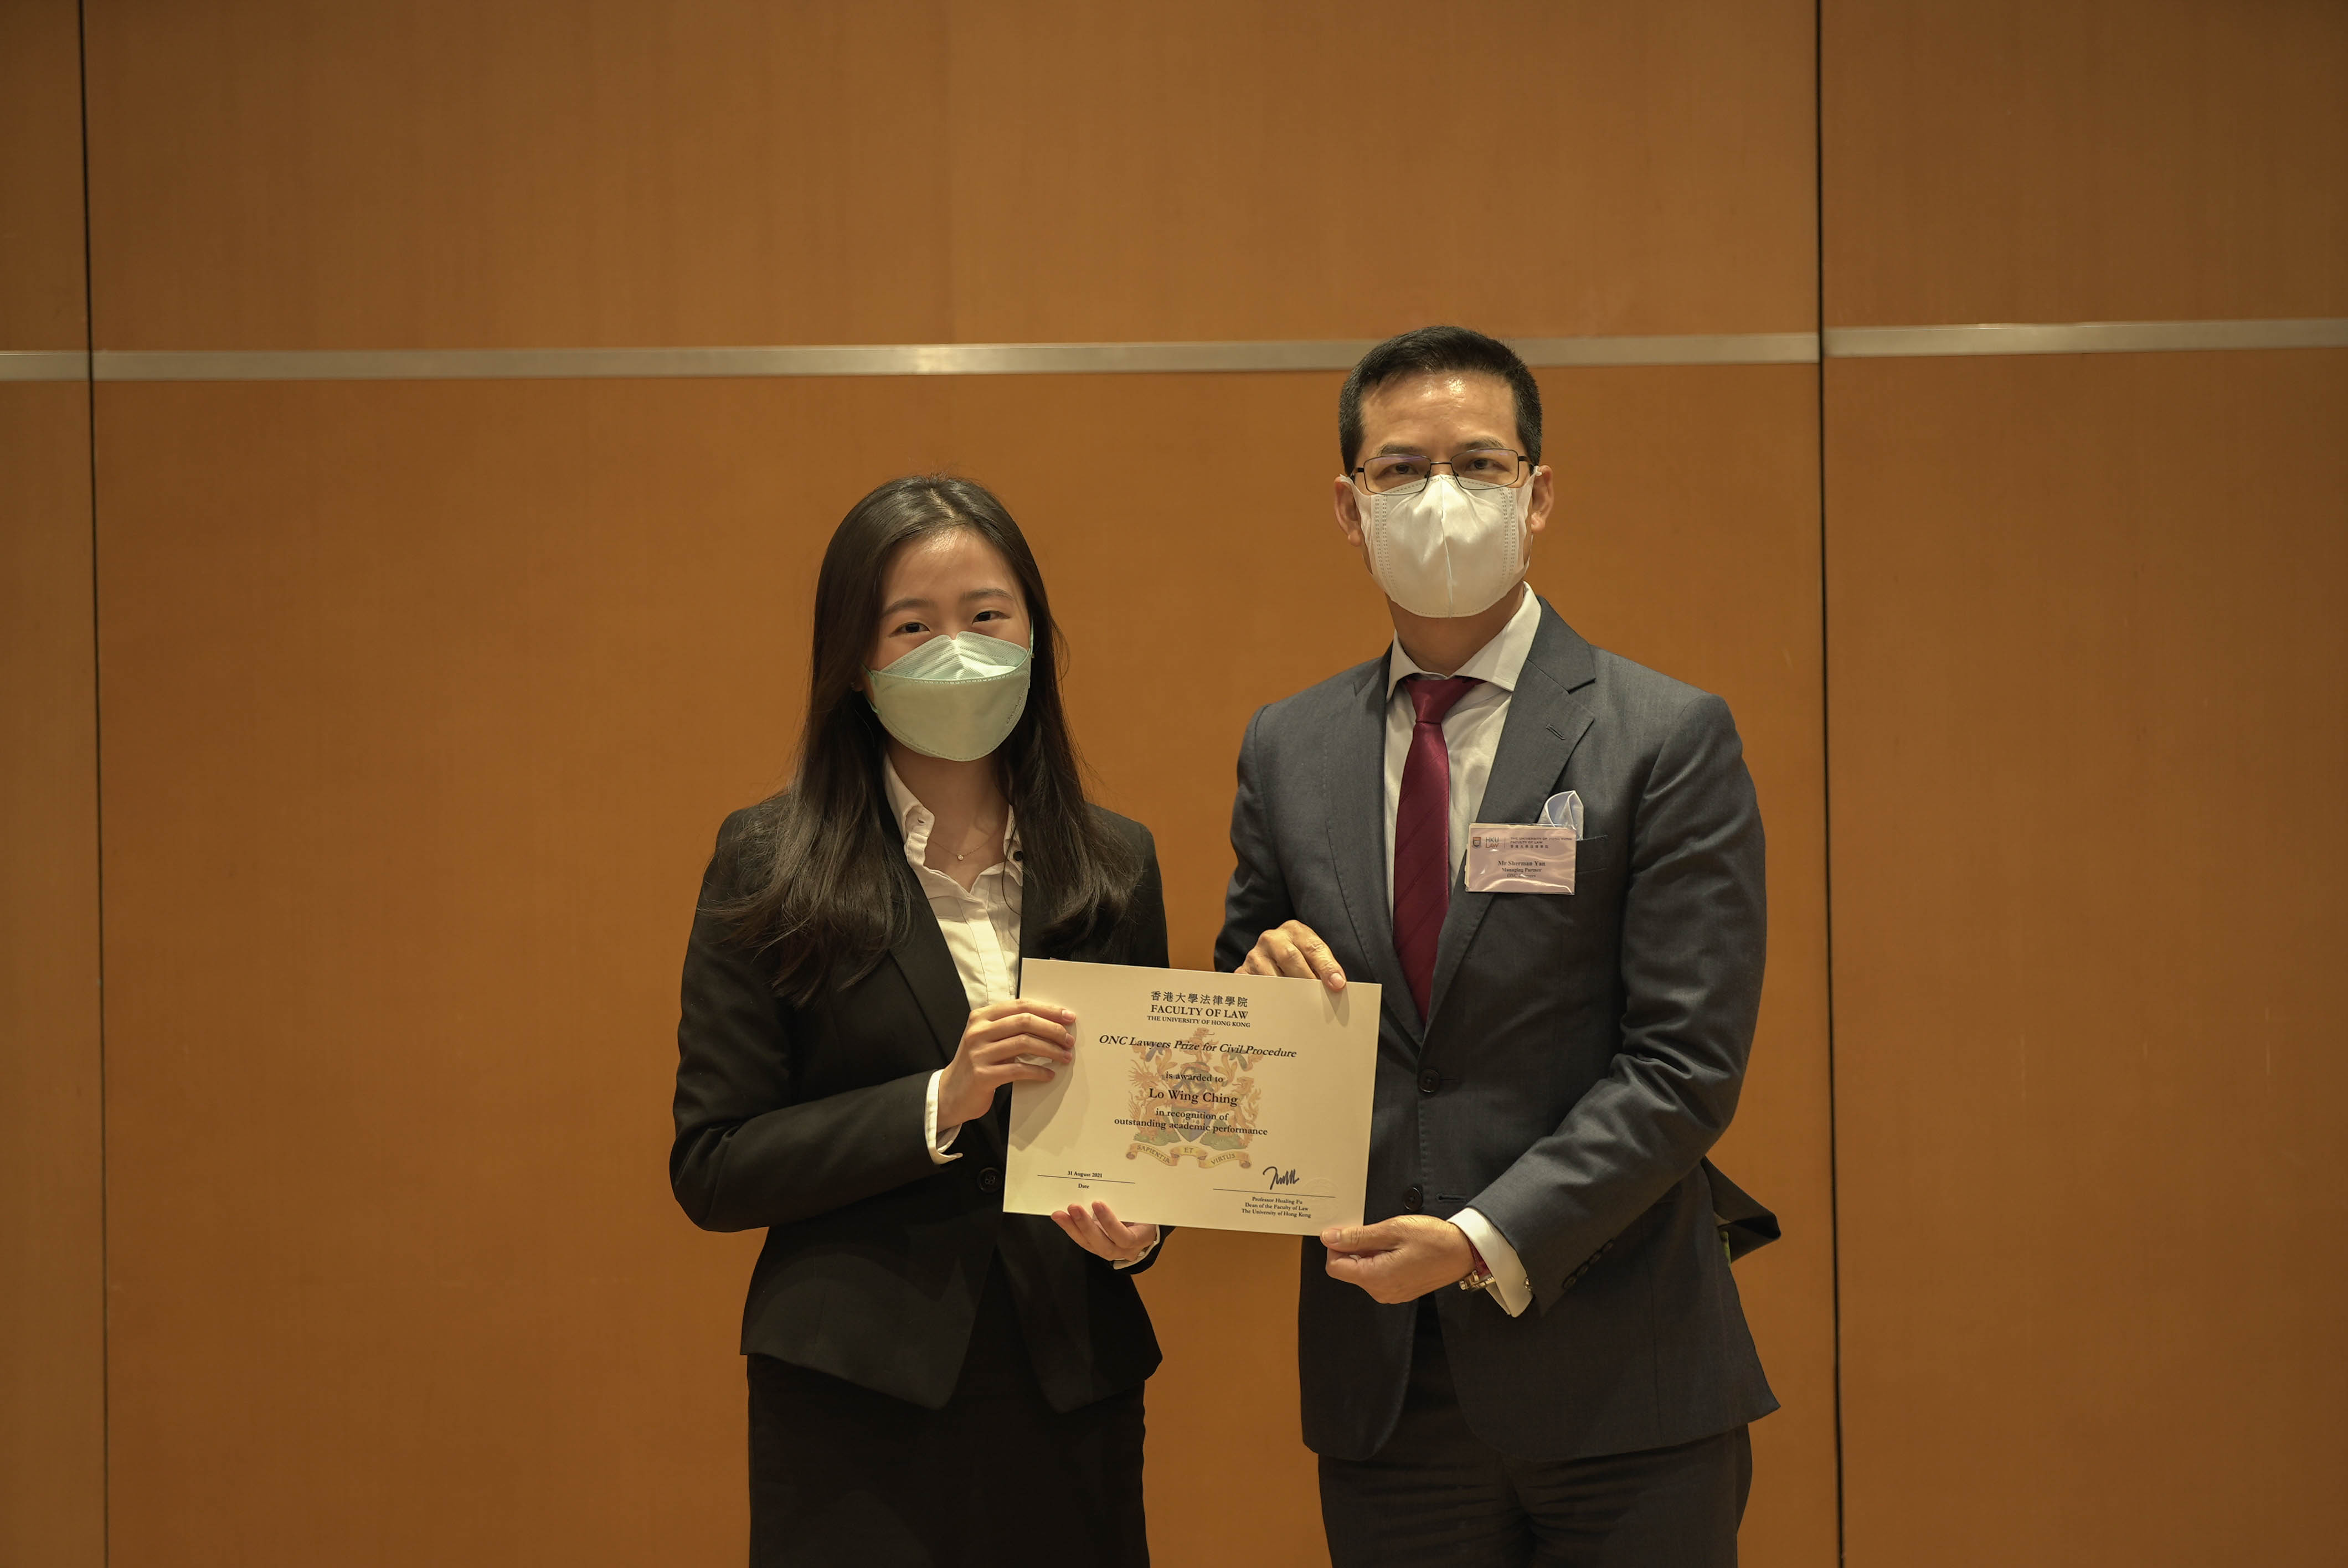 Mr Sherman Yan presented the ONC Lawyers Prize for Civil Procedure 2020-21